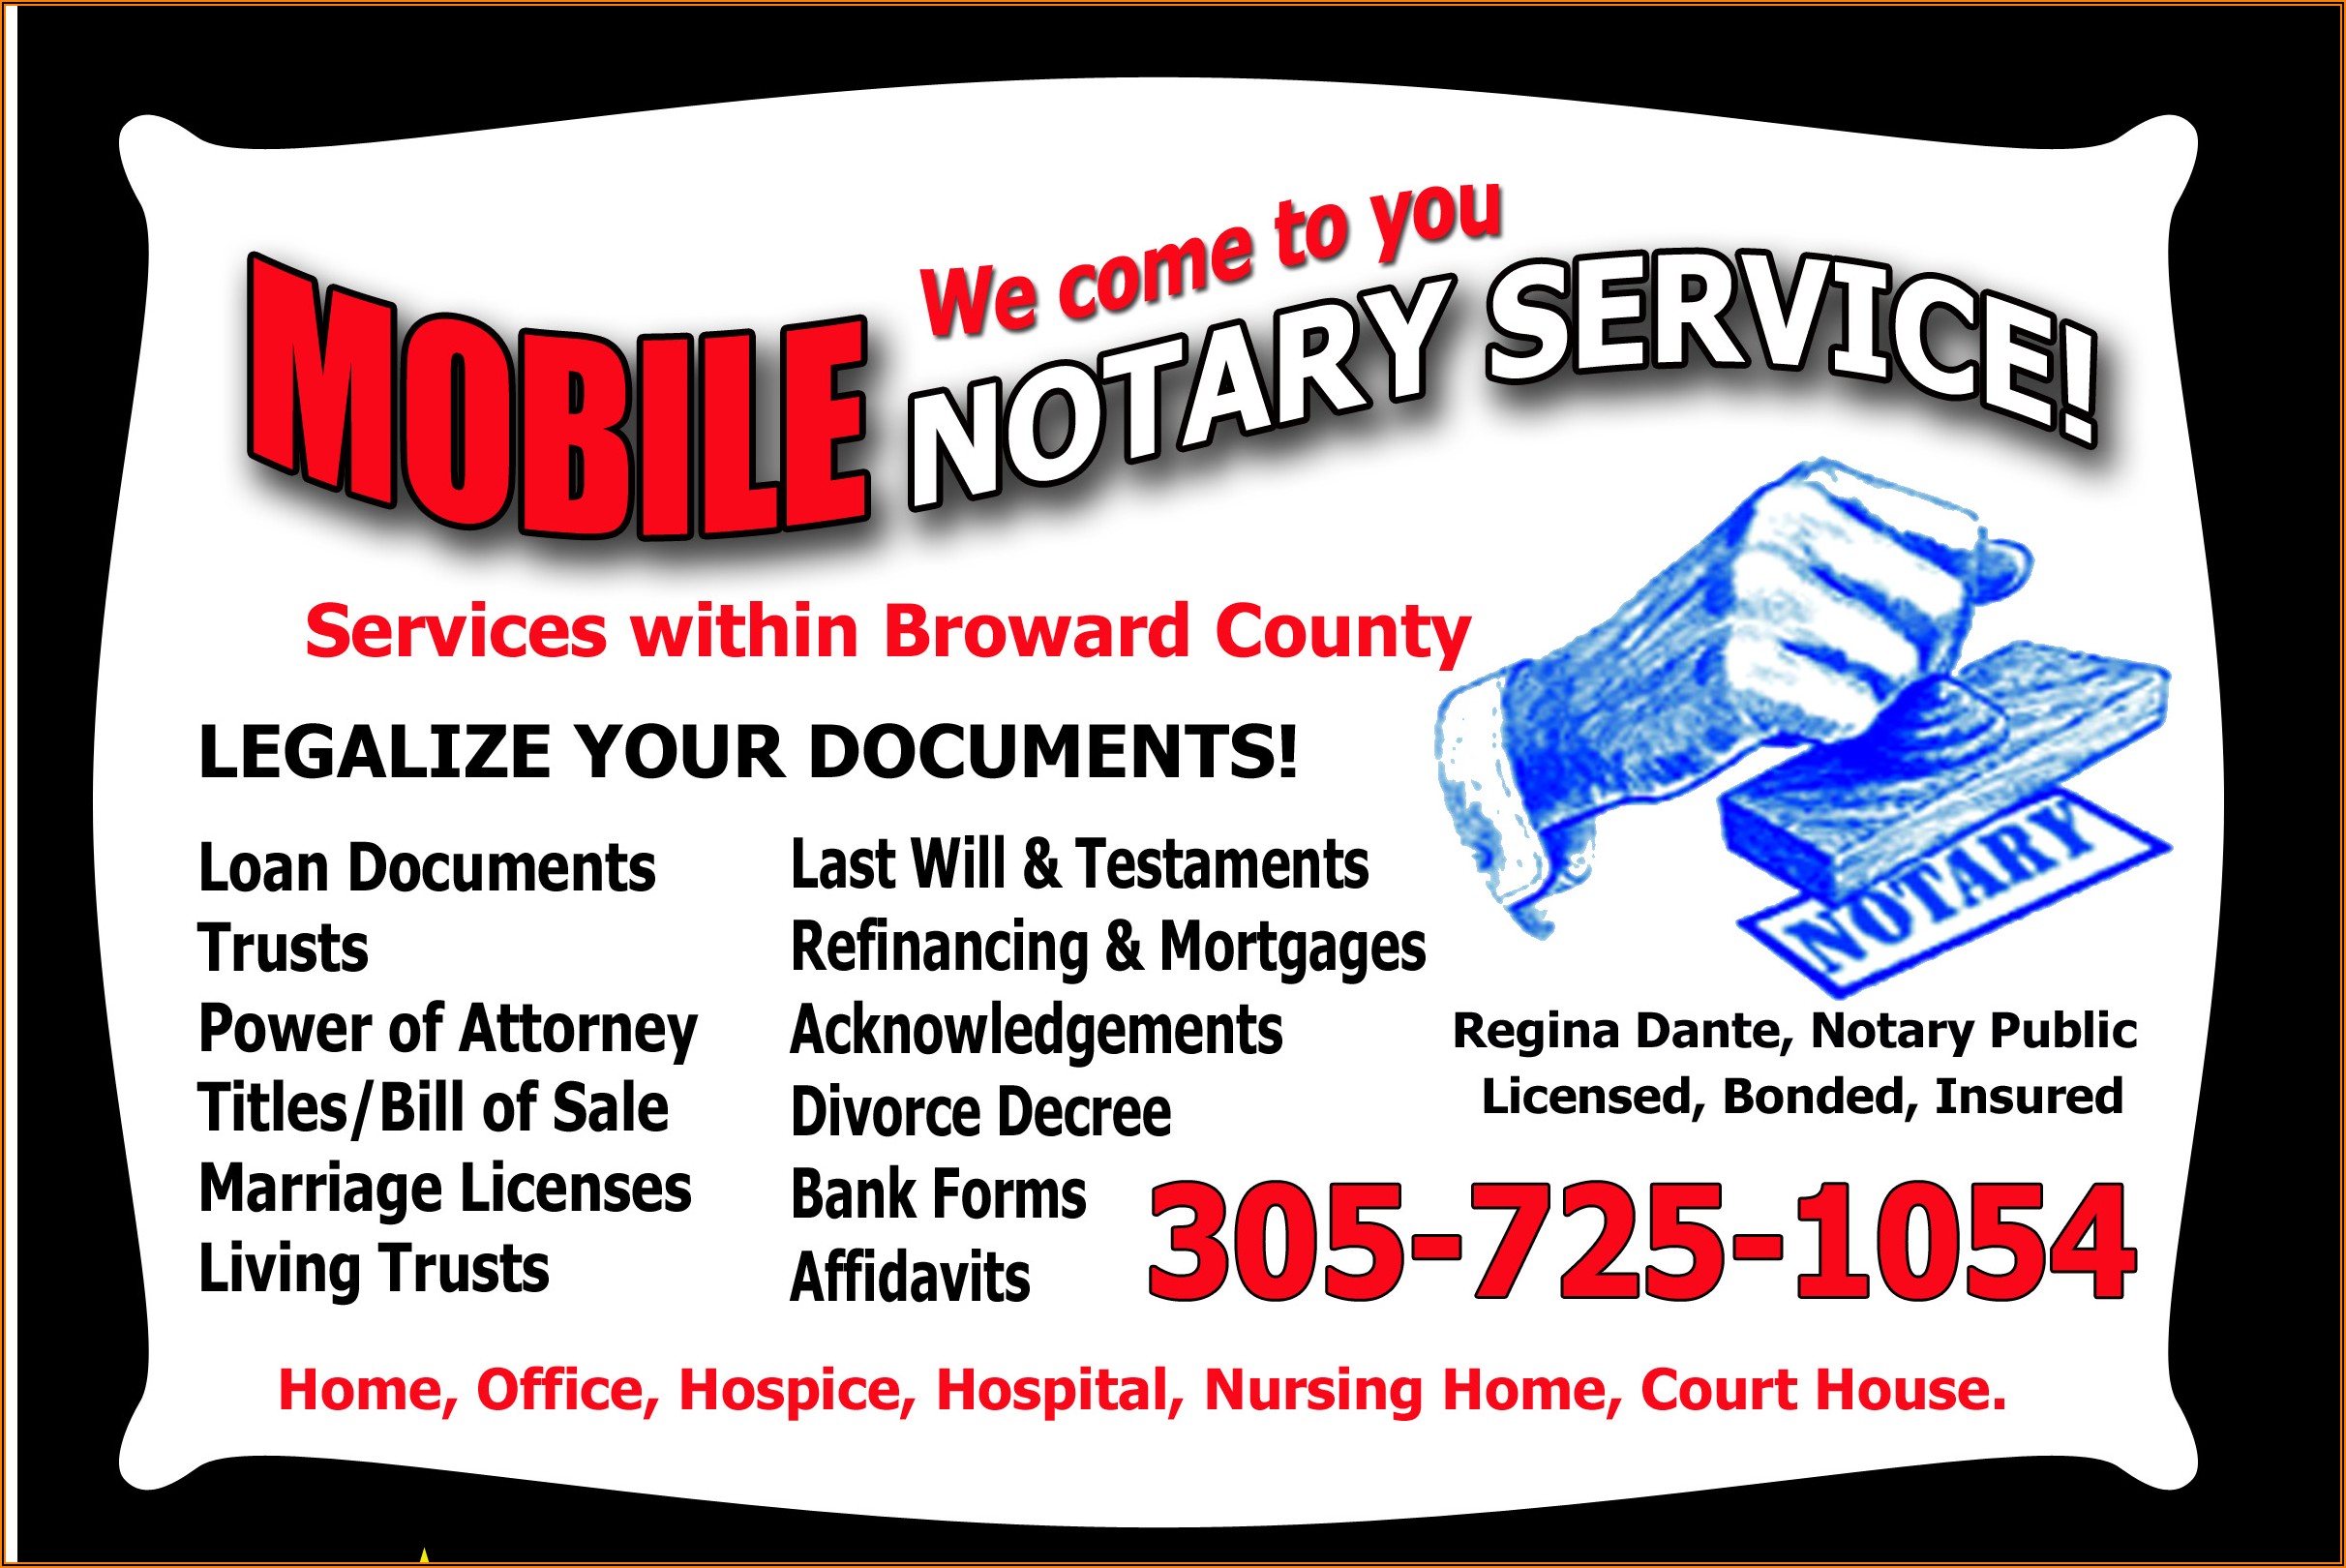 vistaprint notary business cards 2